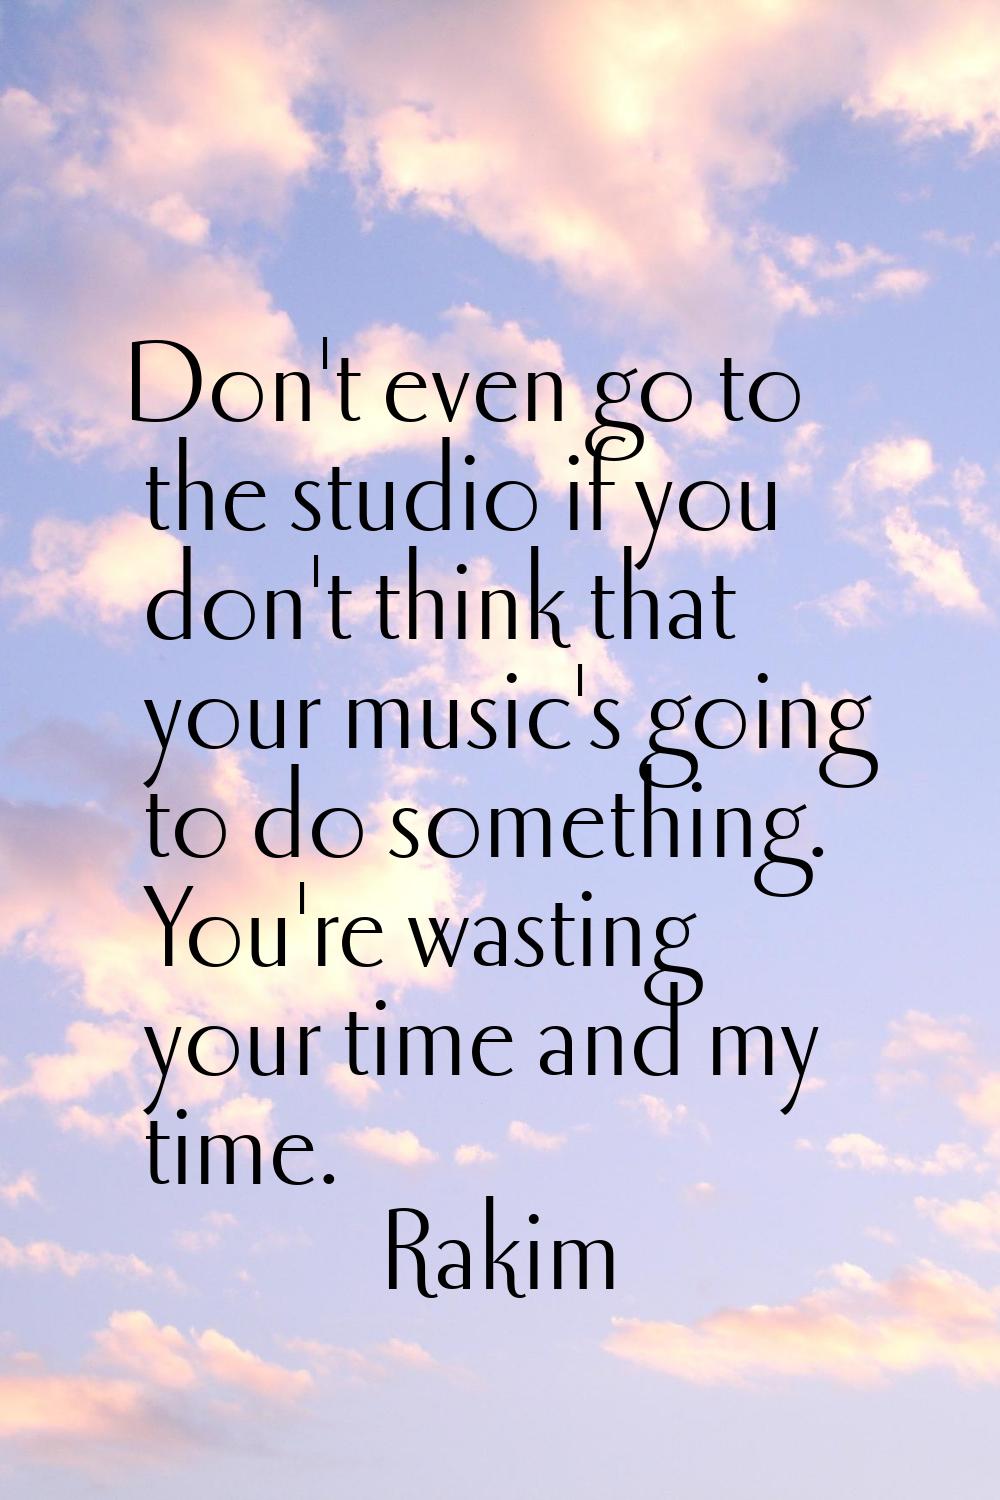 Don't even go to the studio if you don't think that your music's going to do something. You're wast